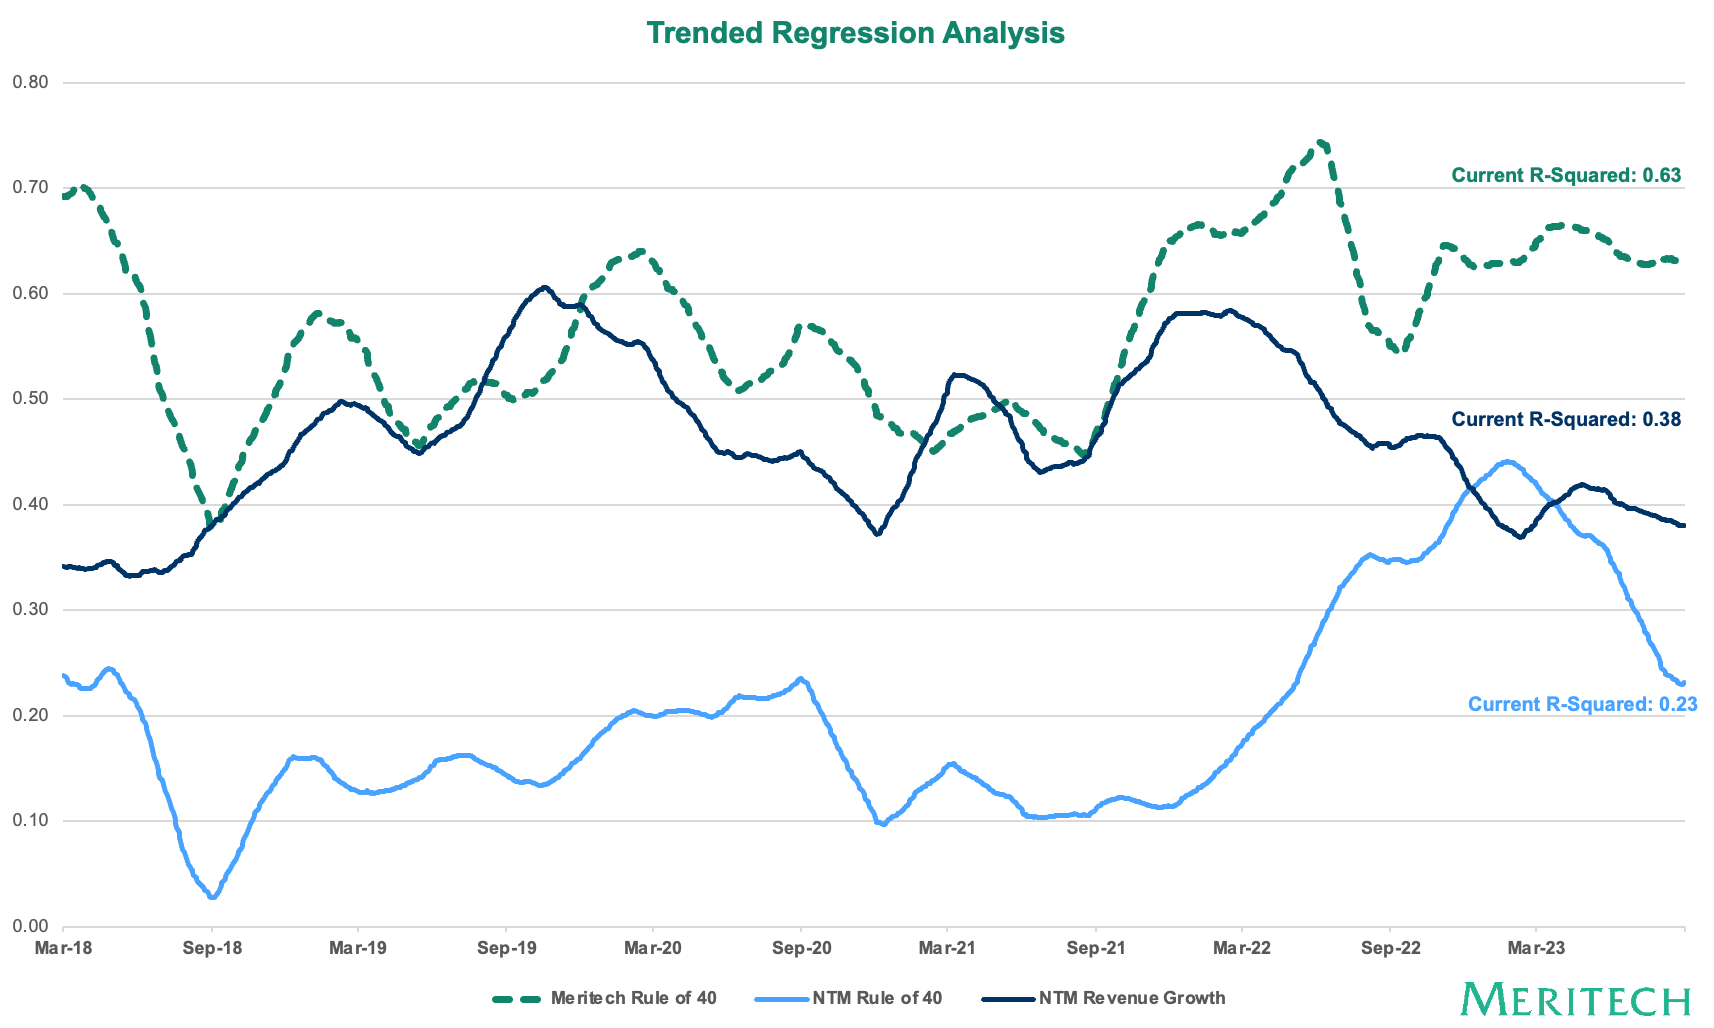 14-Trended-Regression-Analysis---Growth-vs.-Rule-of-40-vs.-Meritech-Rule-of-40